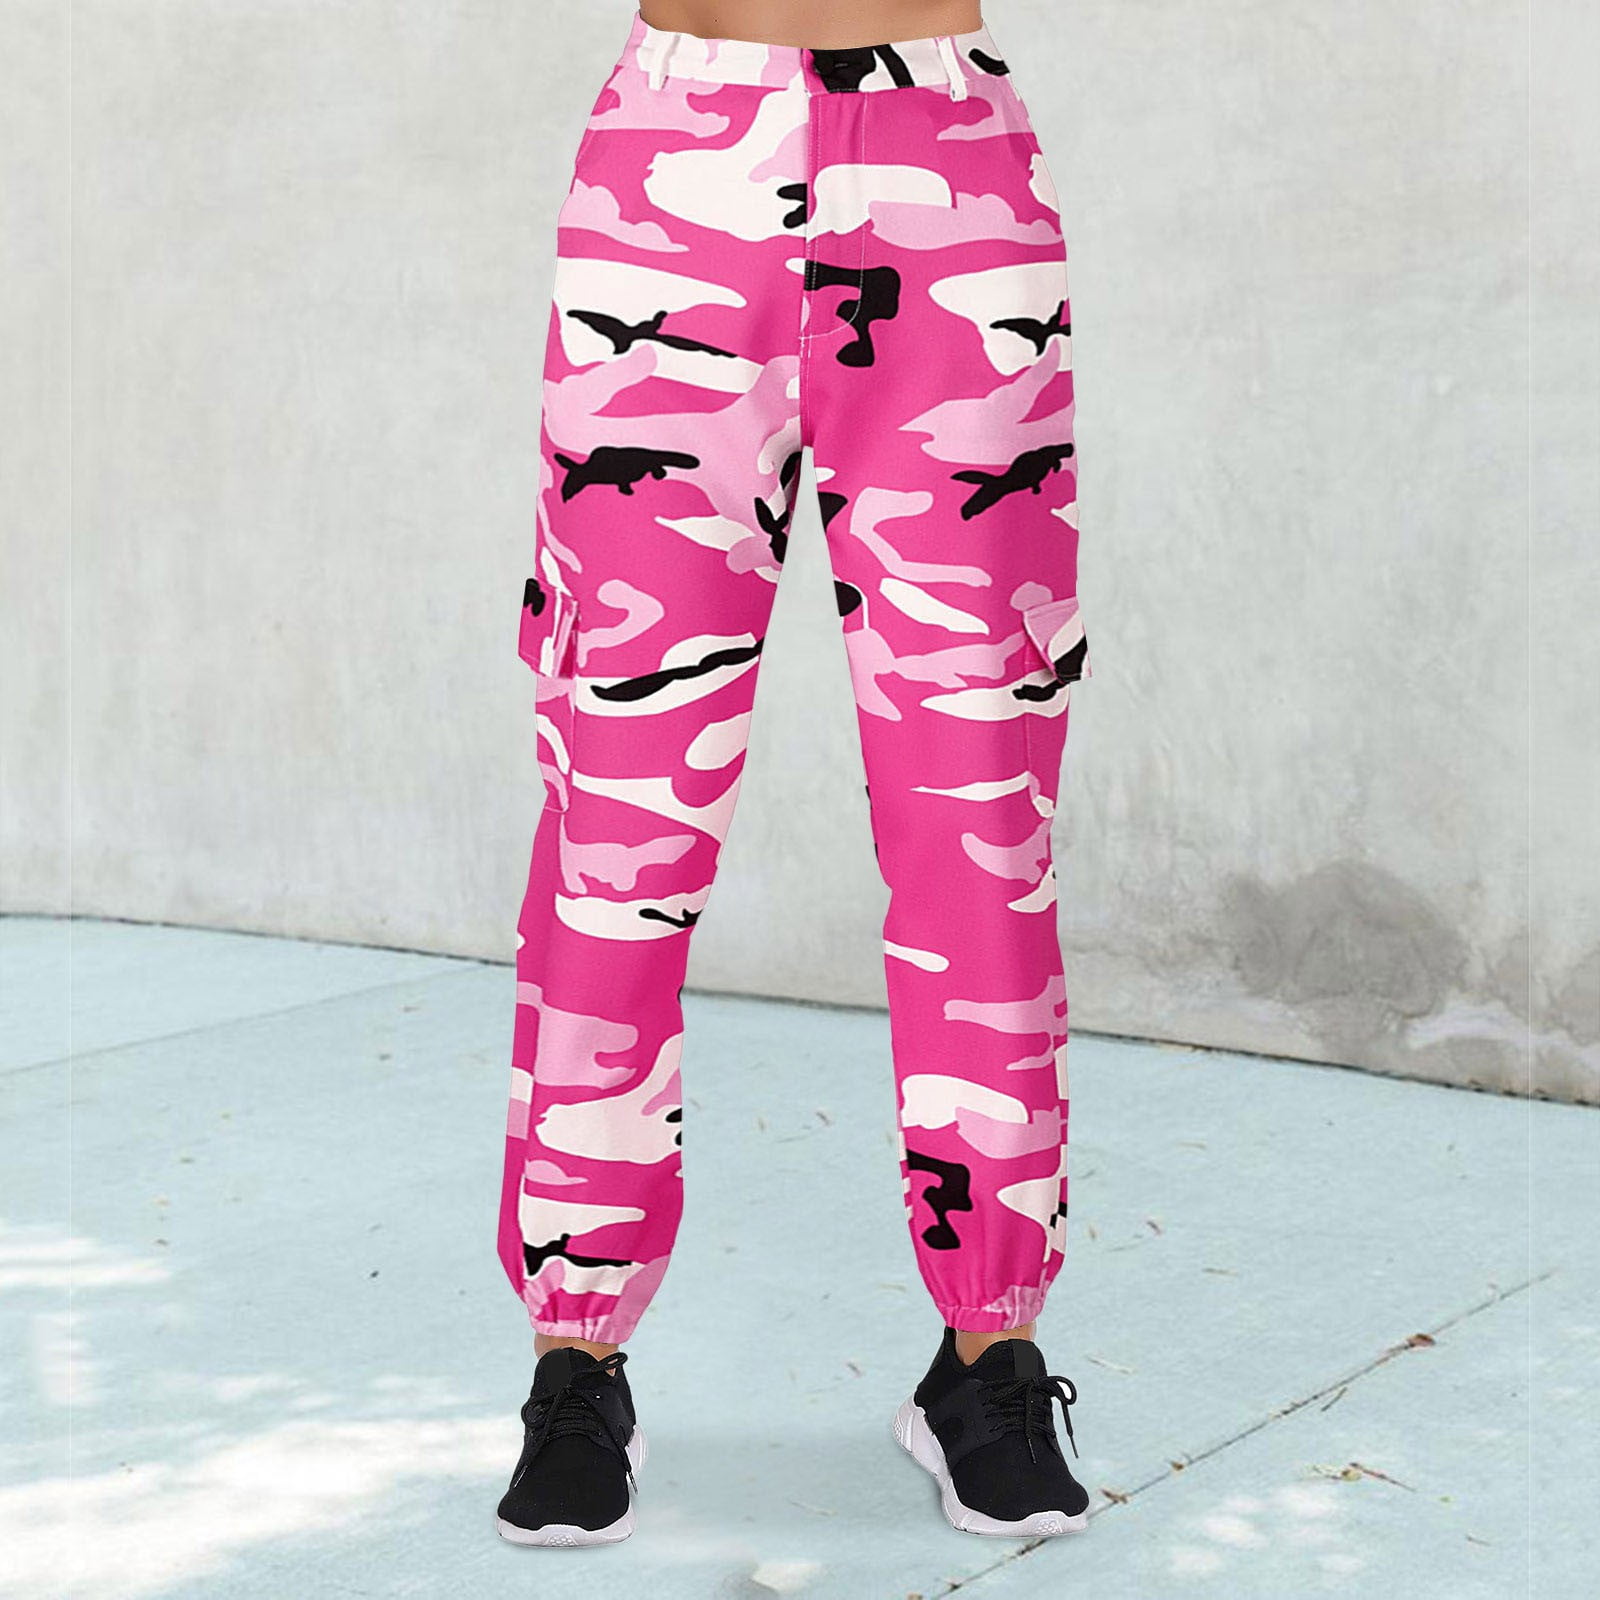 Buy Women Camouflage Baggy Cargo Pants High Waist Wide Leg Streetwear  Casual Sweatpants Emo, 8801, X-Large at Amazon.in